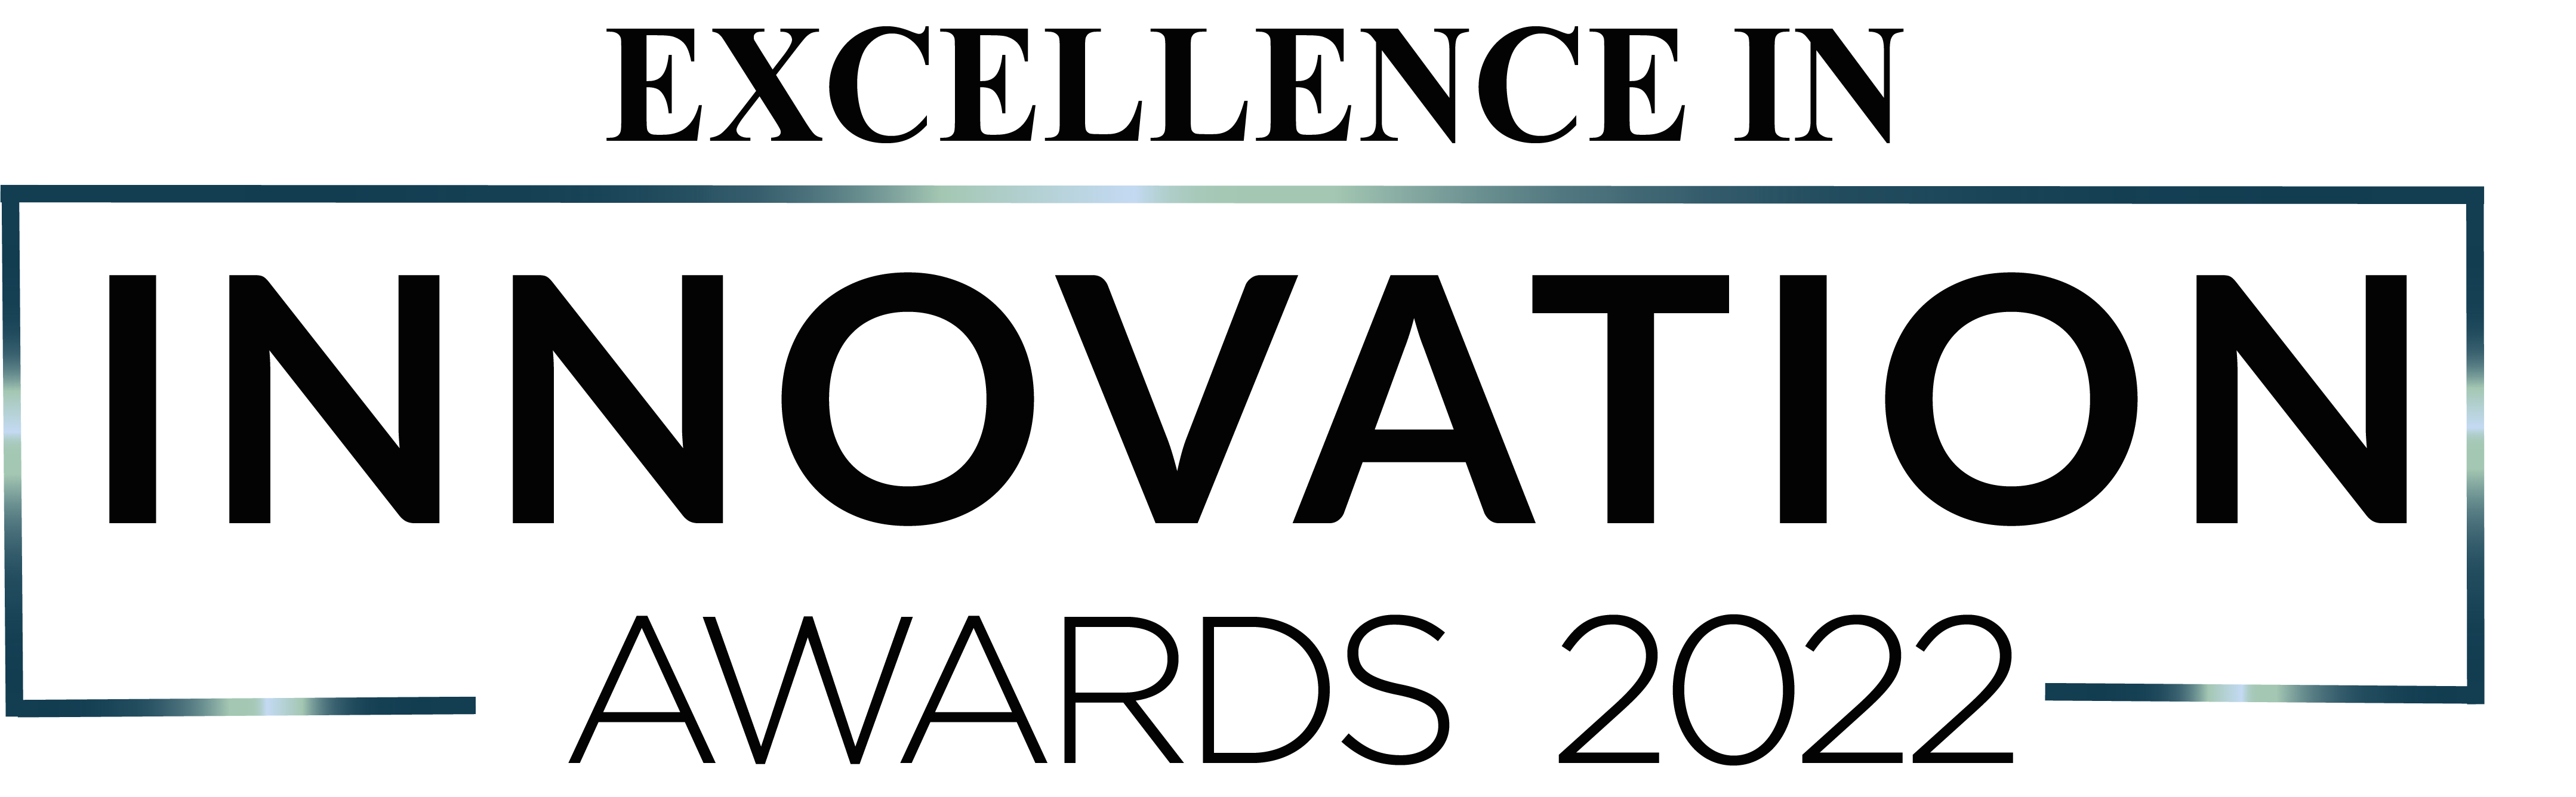 Excellence in Innovation Awards